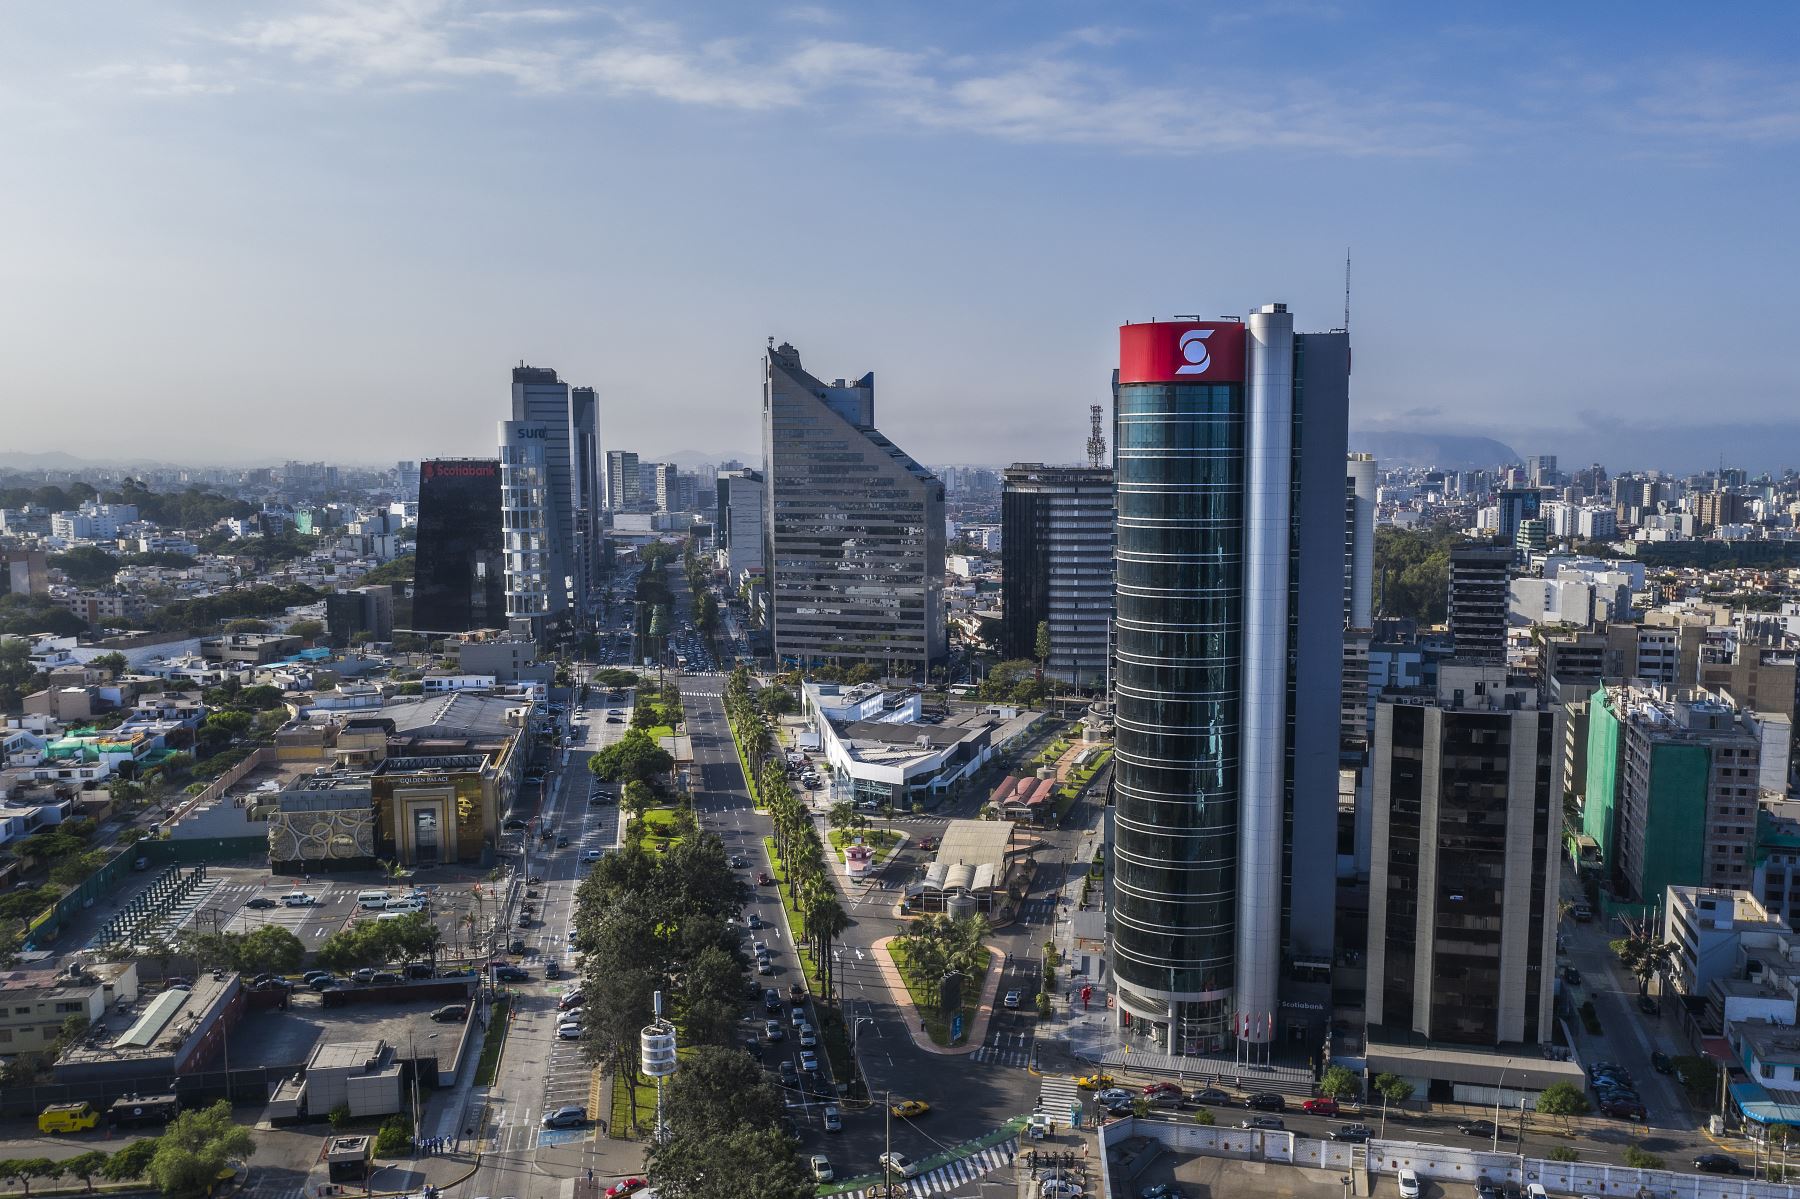 Business district in Peru's capital Lima. (Photo internet reproduction)